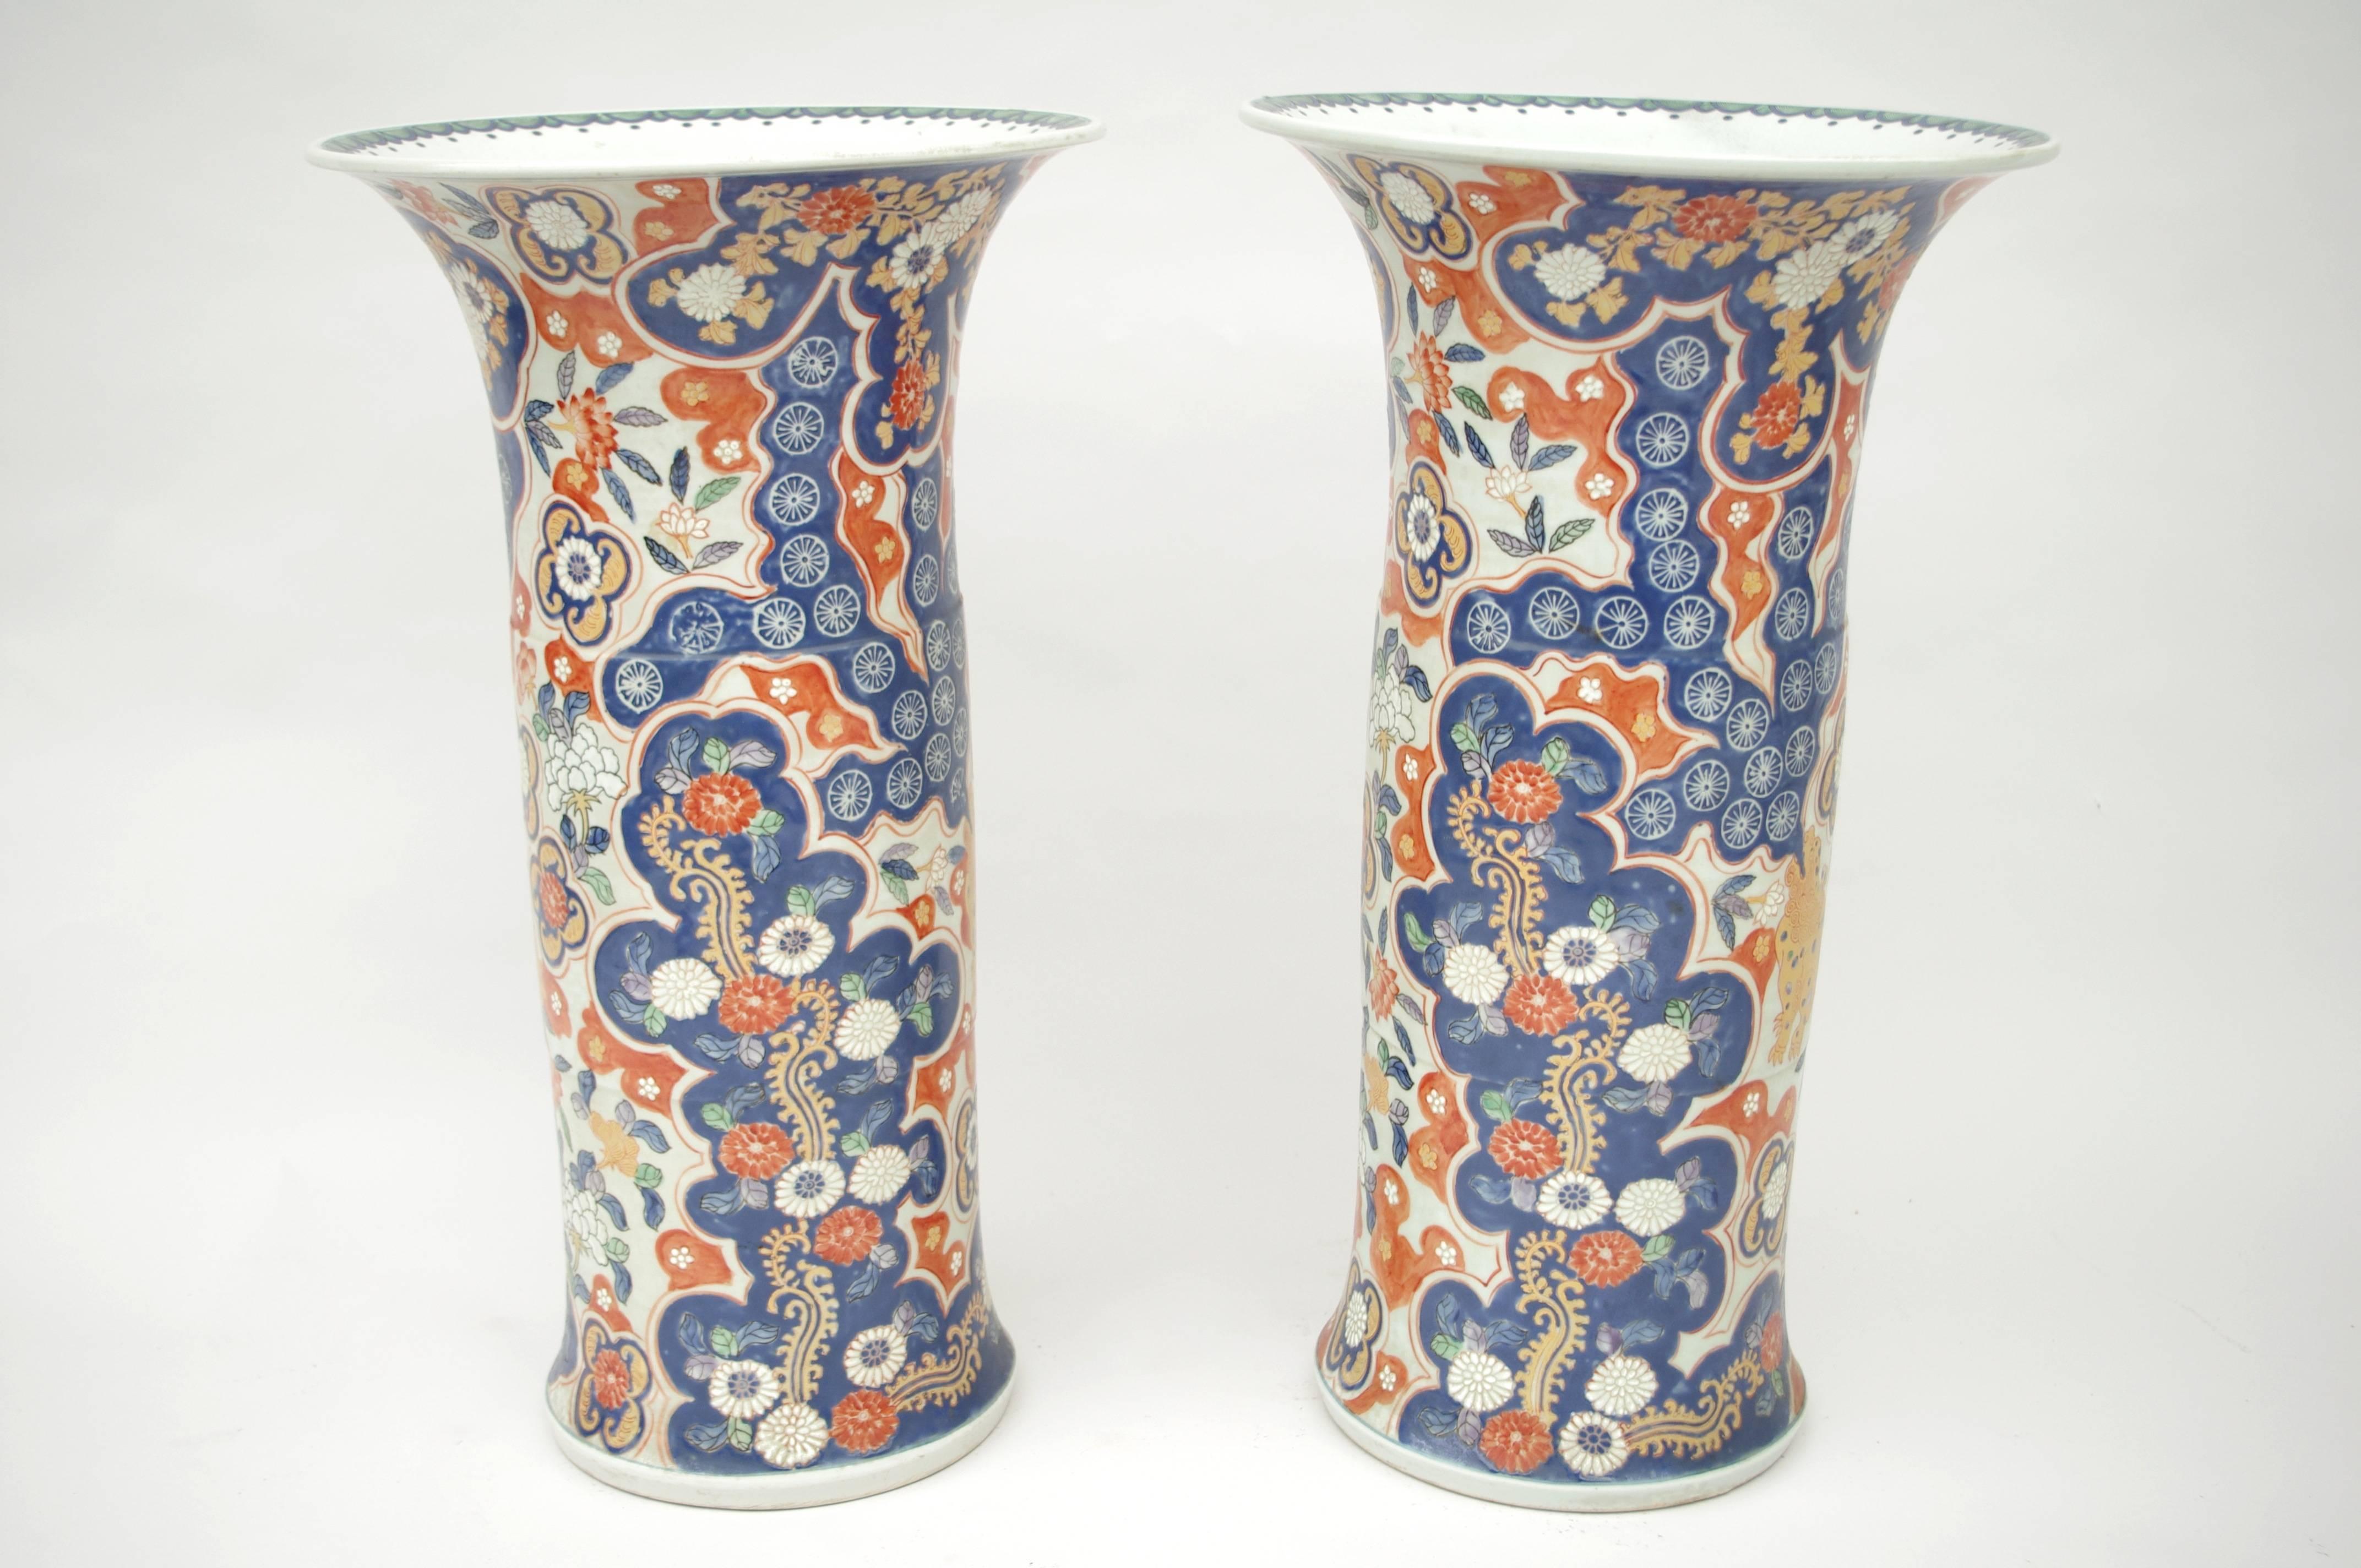 Rouleaux vases.
Imari porcelain.
Pho dogs and flowers decor.
1900 period.